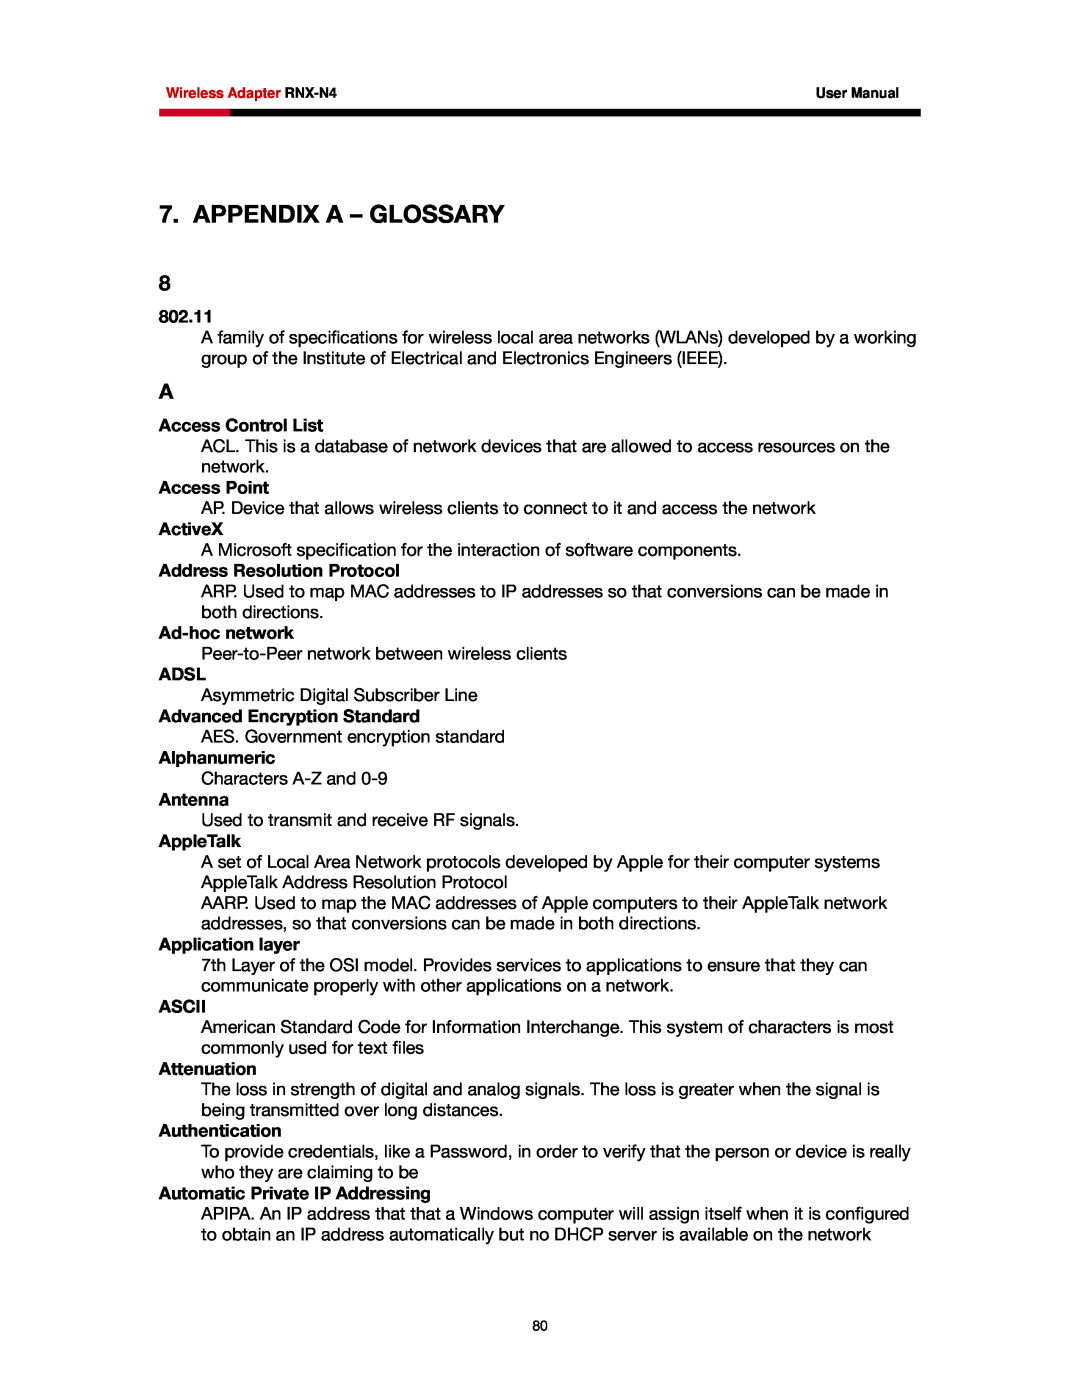 Rosewill RNX-N4 user manual Appendix A - Glossary 